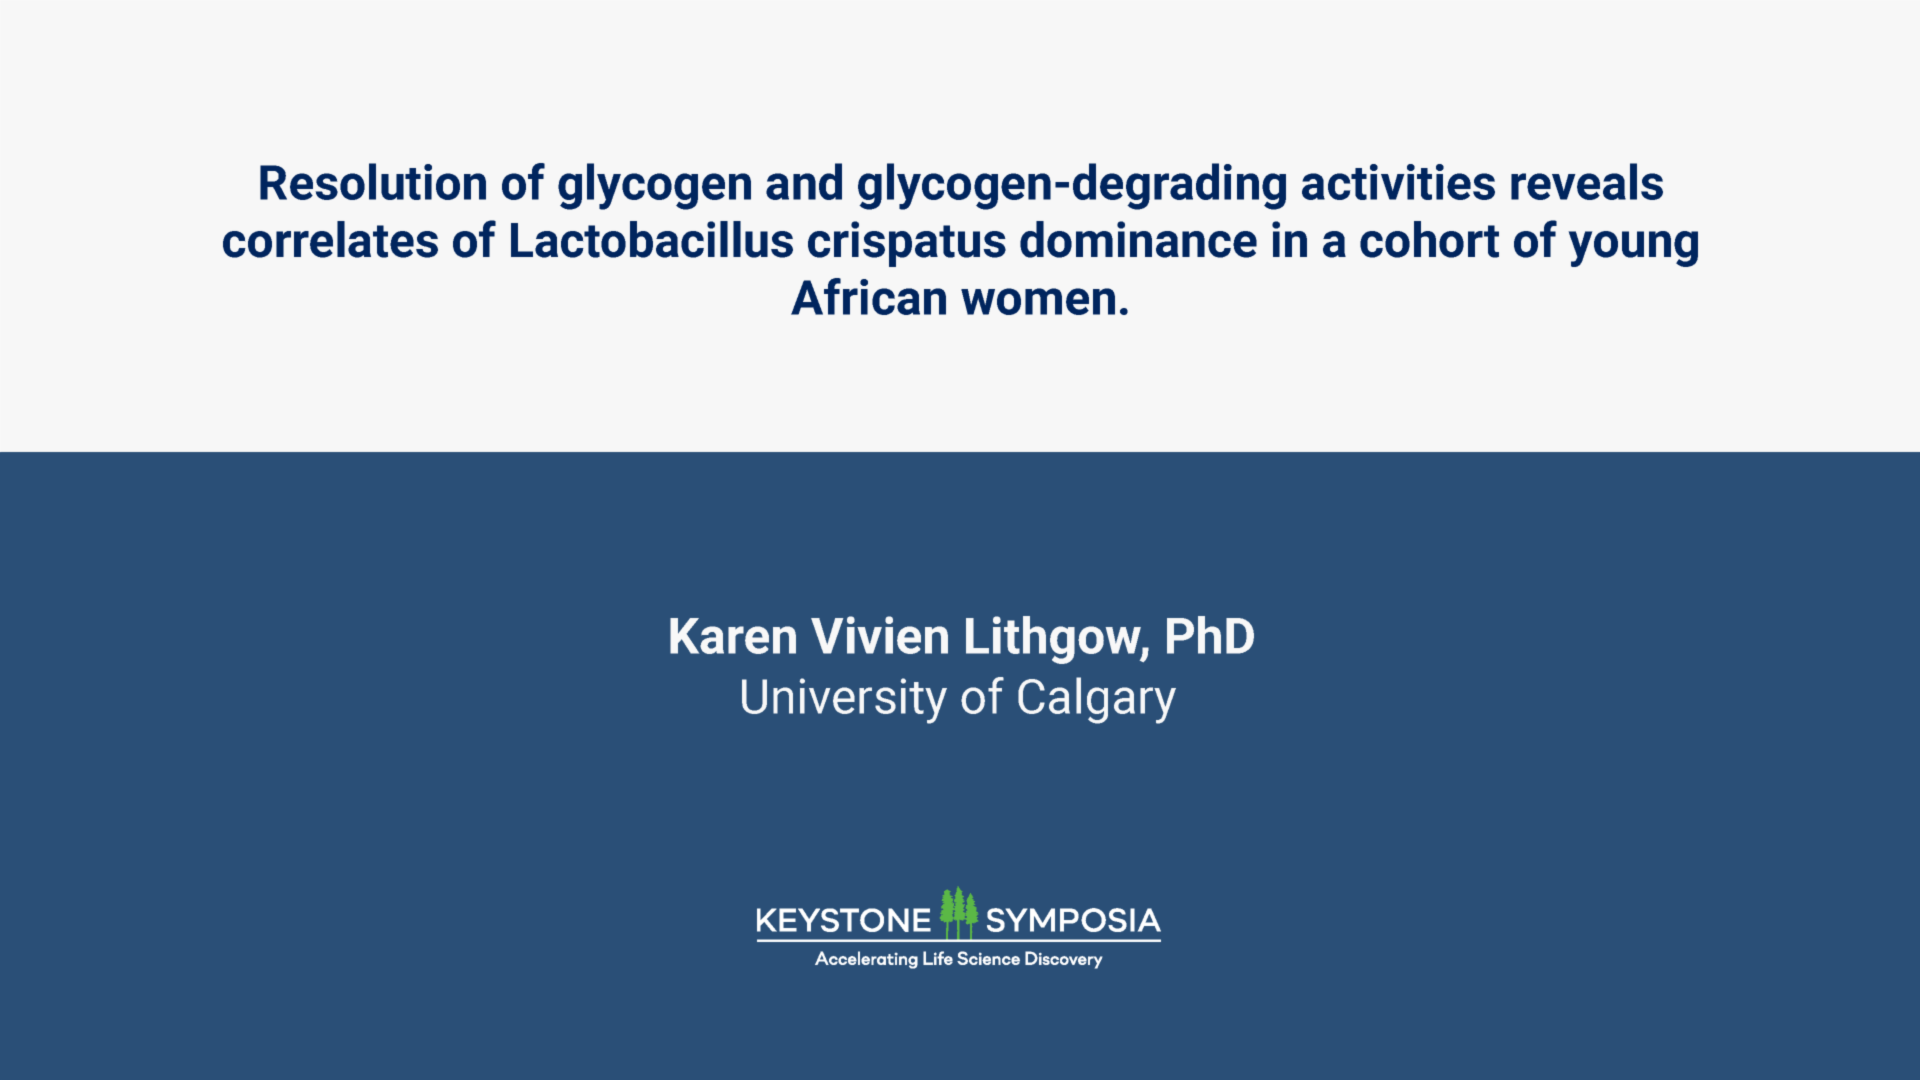 Resolution of glycogen and glycogen-degrading activities reveals correlates of Lactobacillus crispatus dominance in a cohort of young African women. icon